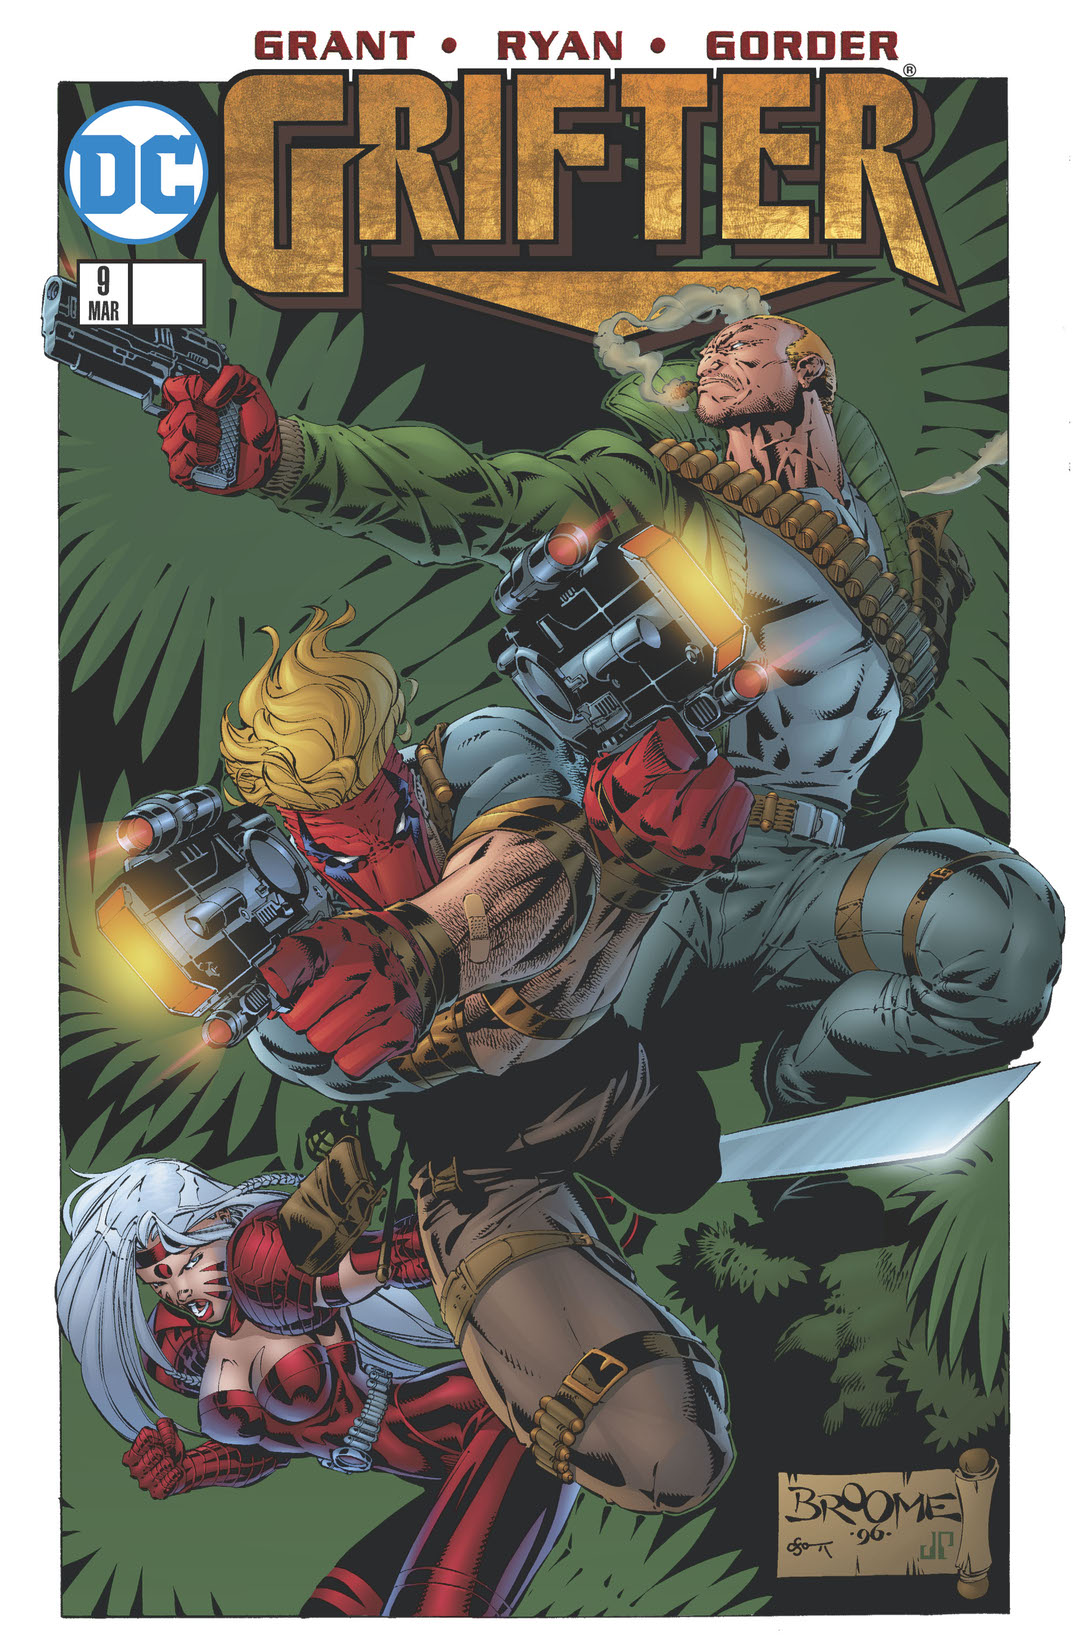 Grifter (1996-1997) #9 preview images